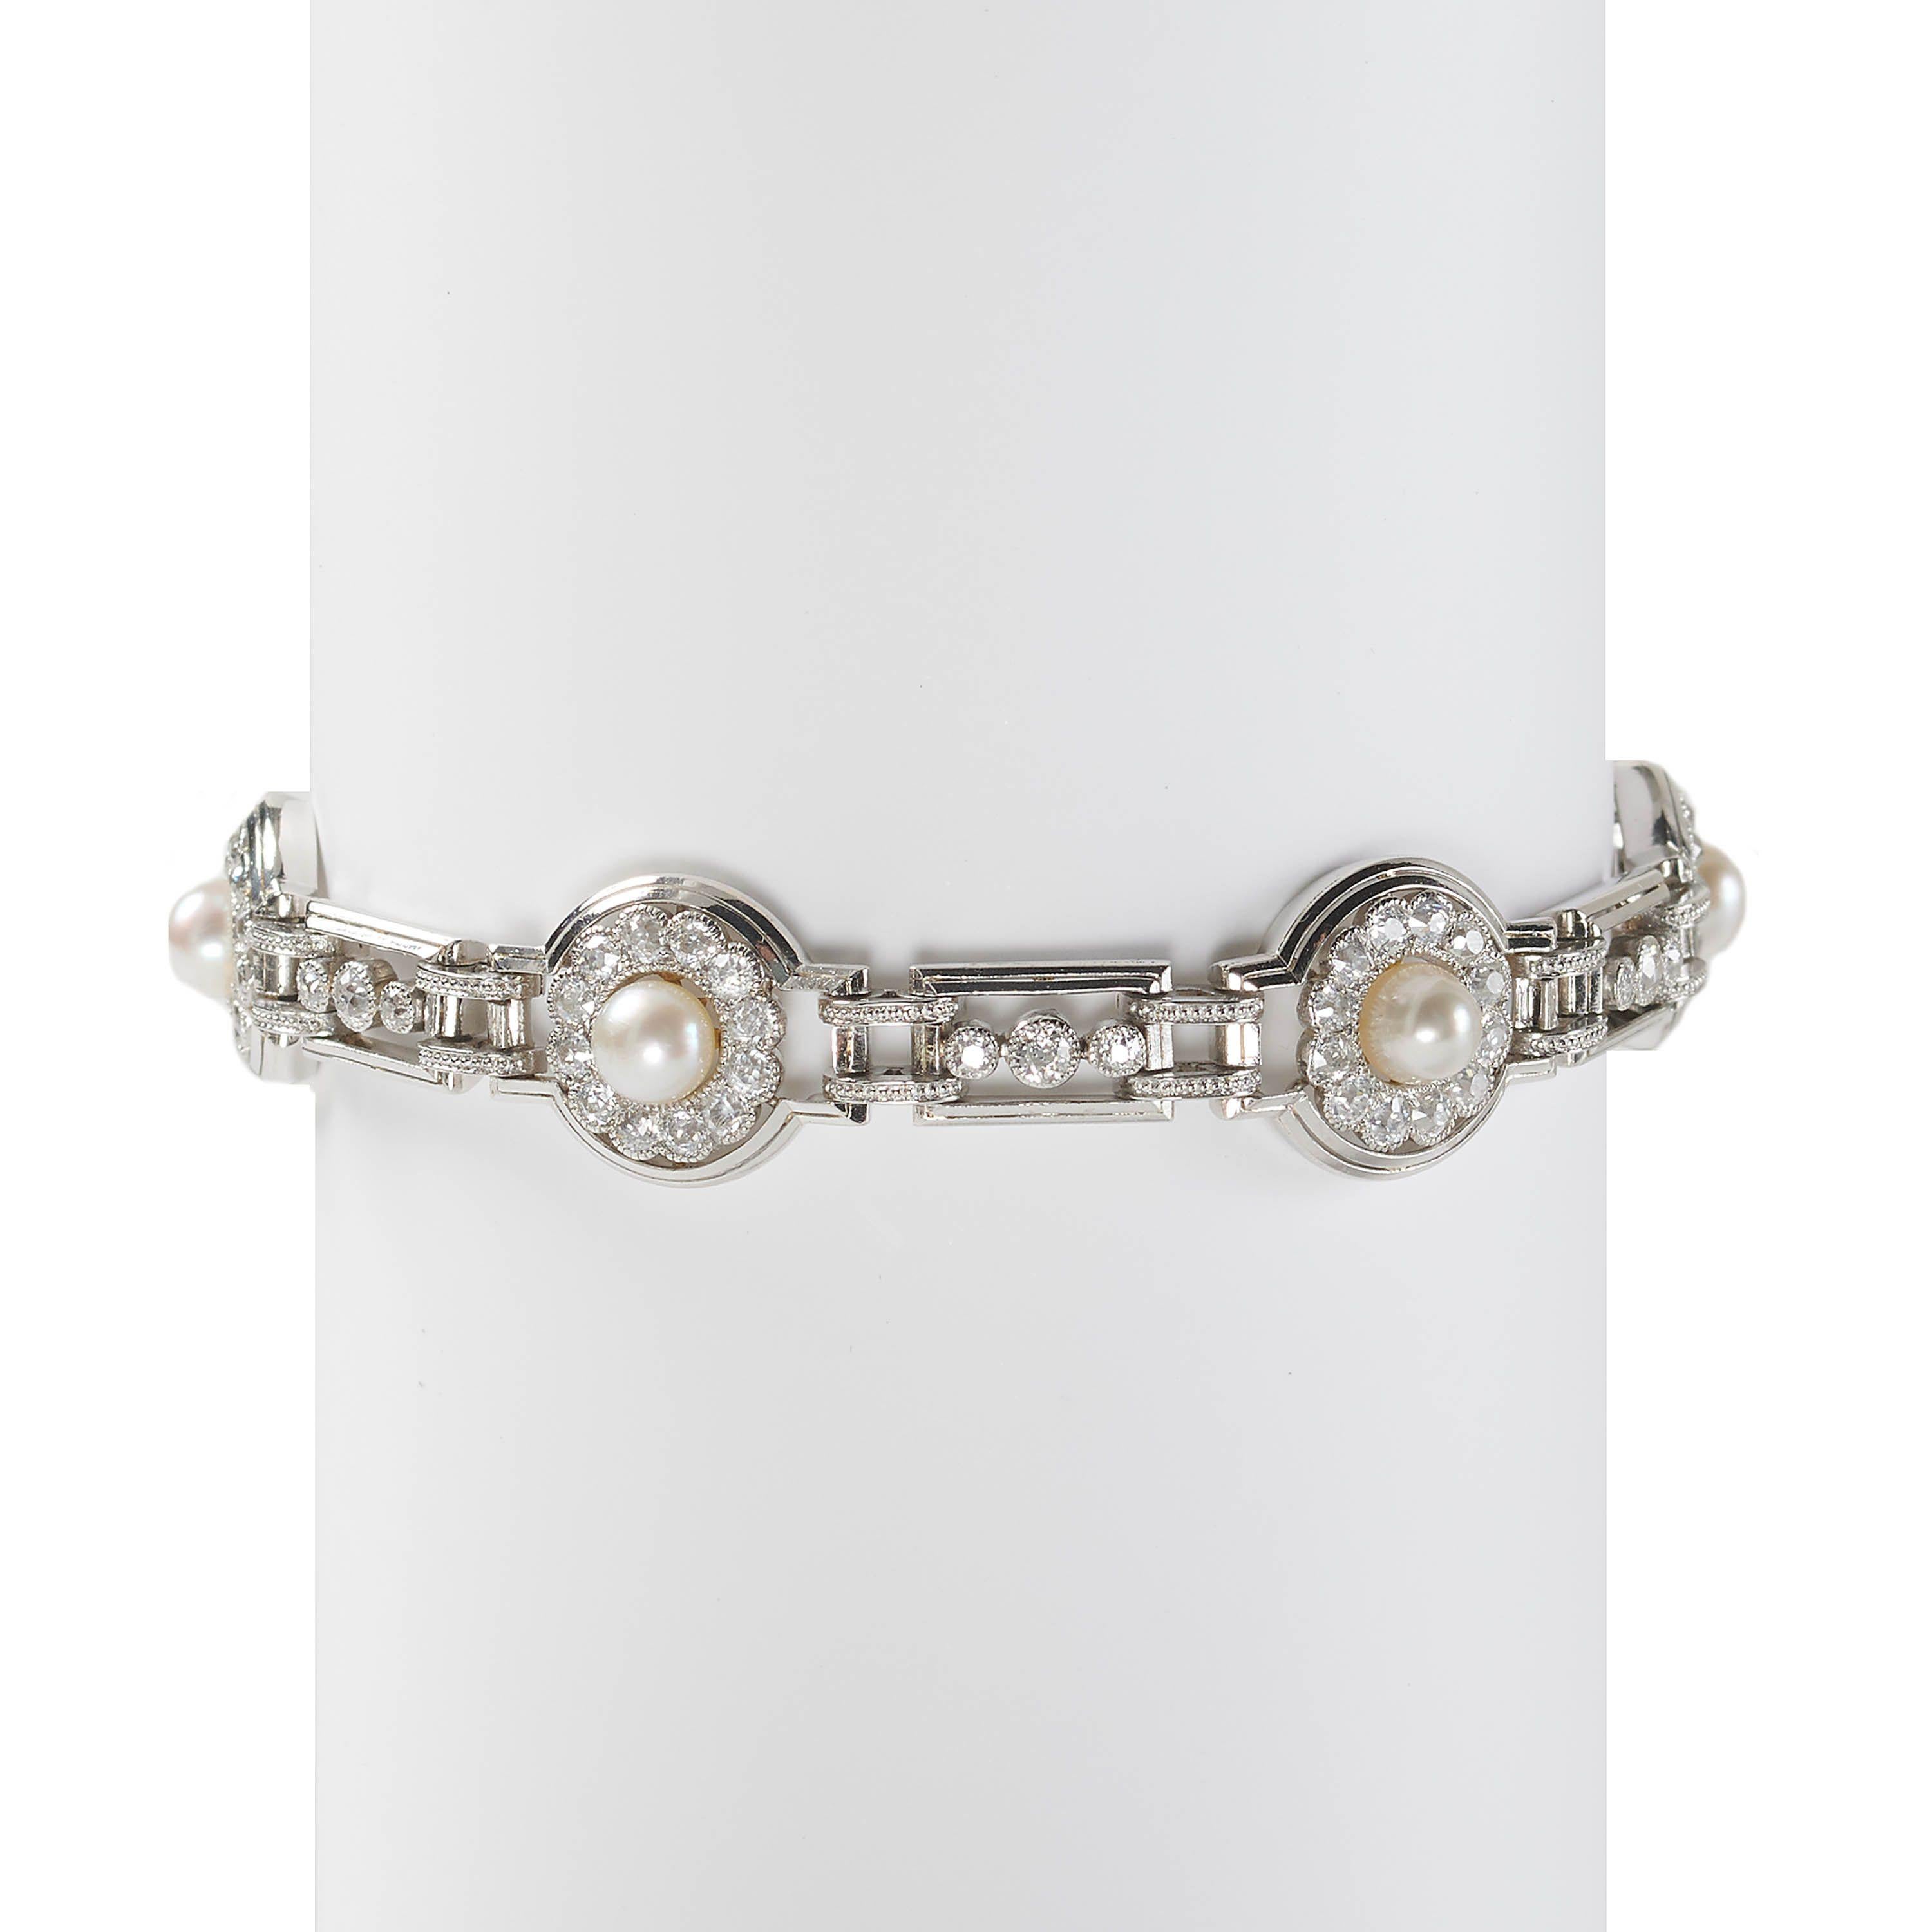 An Art Deco natural pearl, diamond and platinum bracelet, of an alternating circle and rectangle design, with six, graduating, two row platinum rings, each with clusters, set with natural, bouton pearls, on gold backed settings, in the centre of